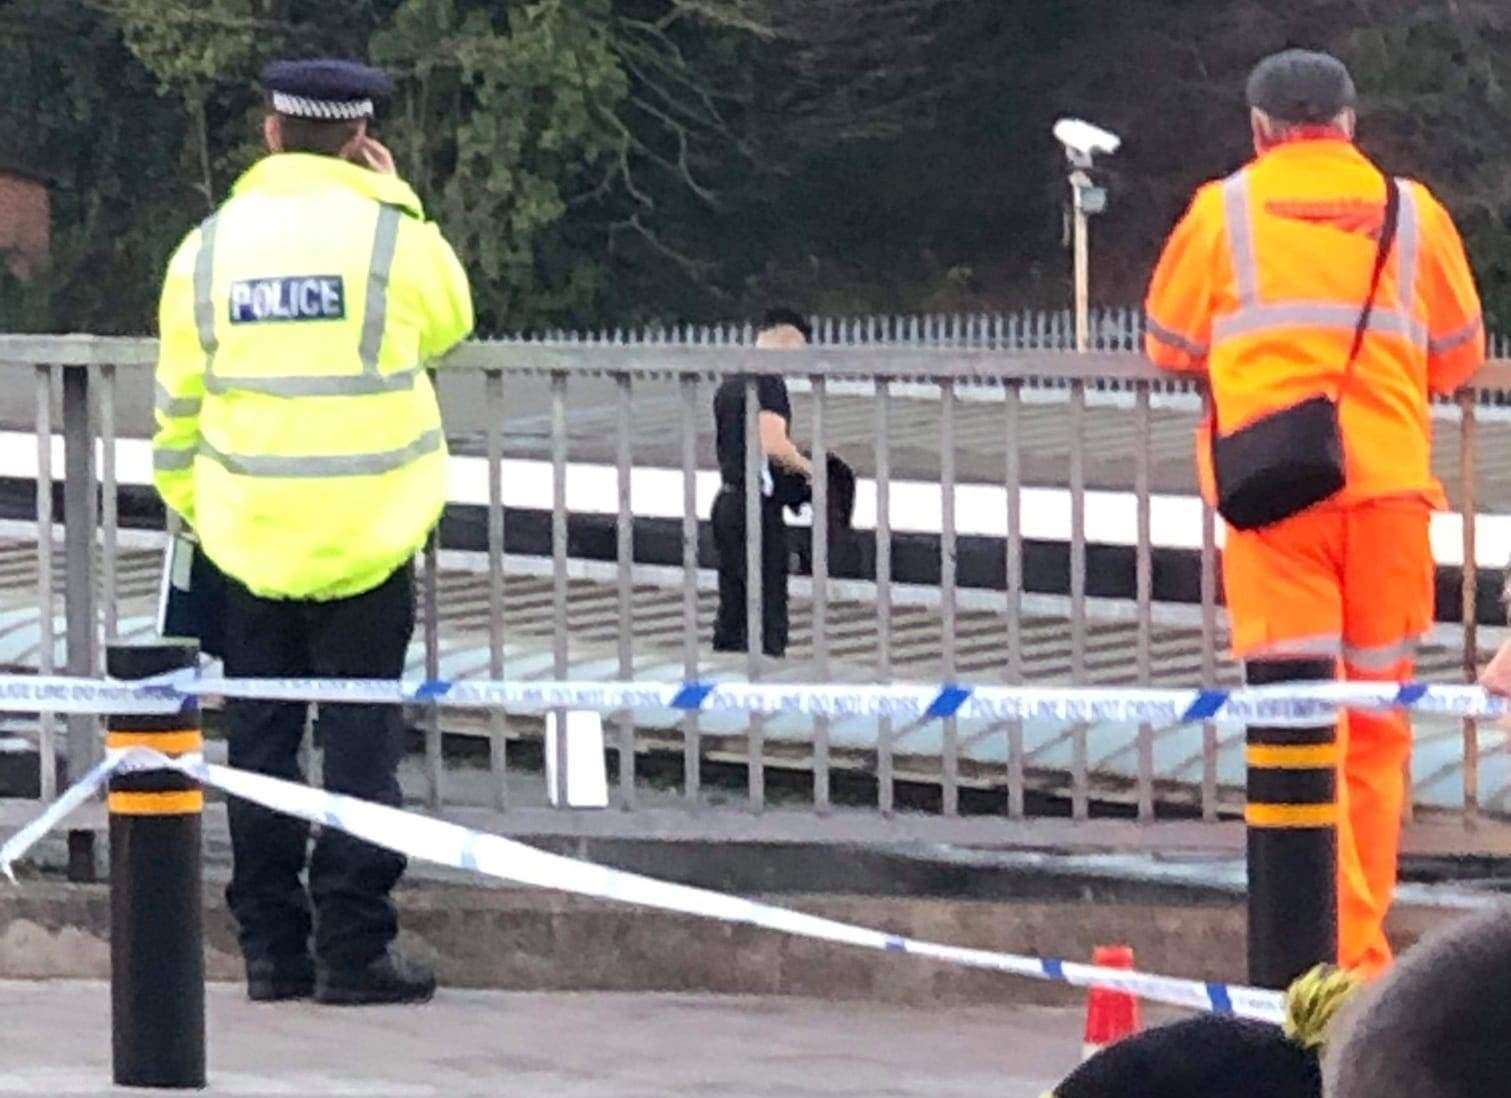 Emergency services were called to Chatham railway station to deal with an incident in which a man was spotted on the roof. Picture: Charlotte Barritt